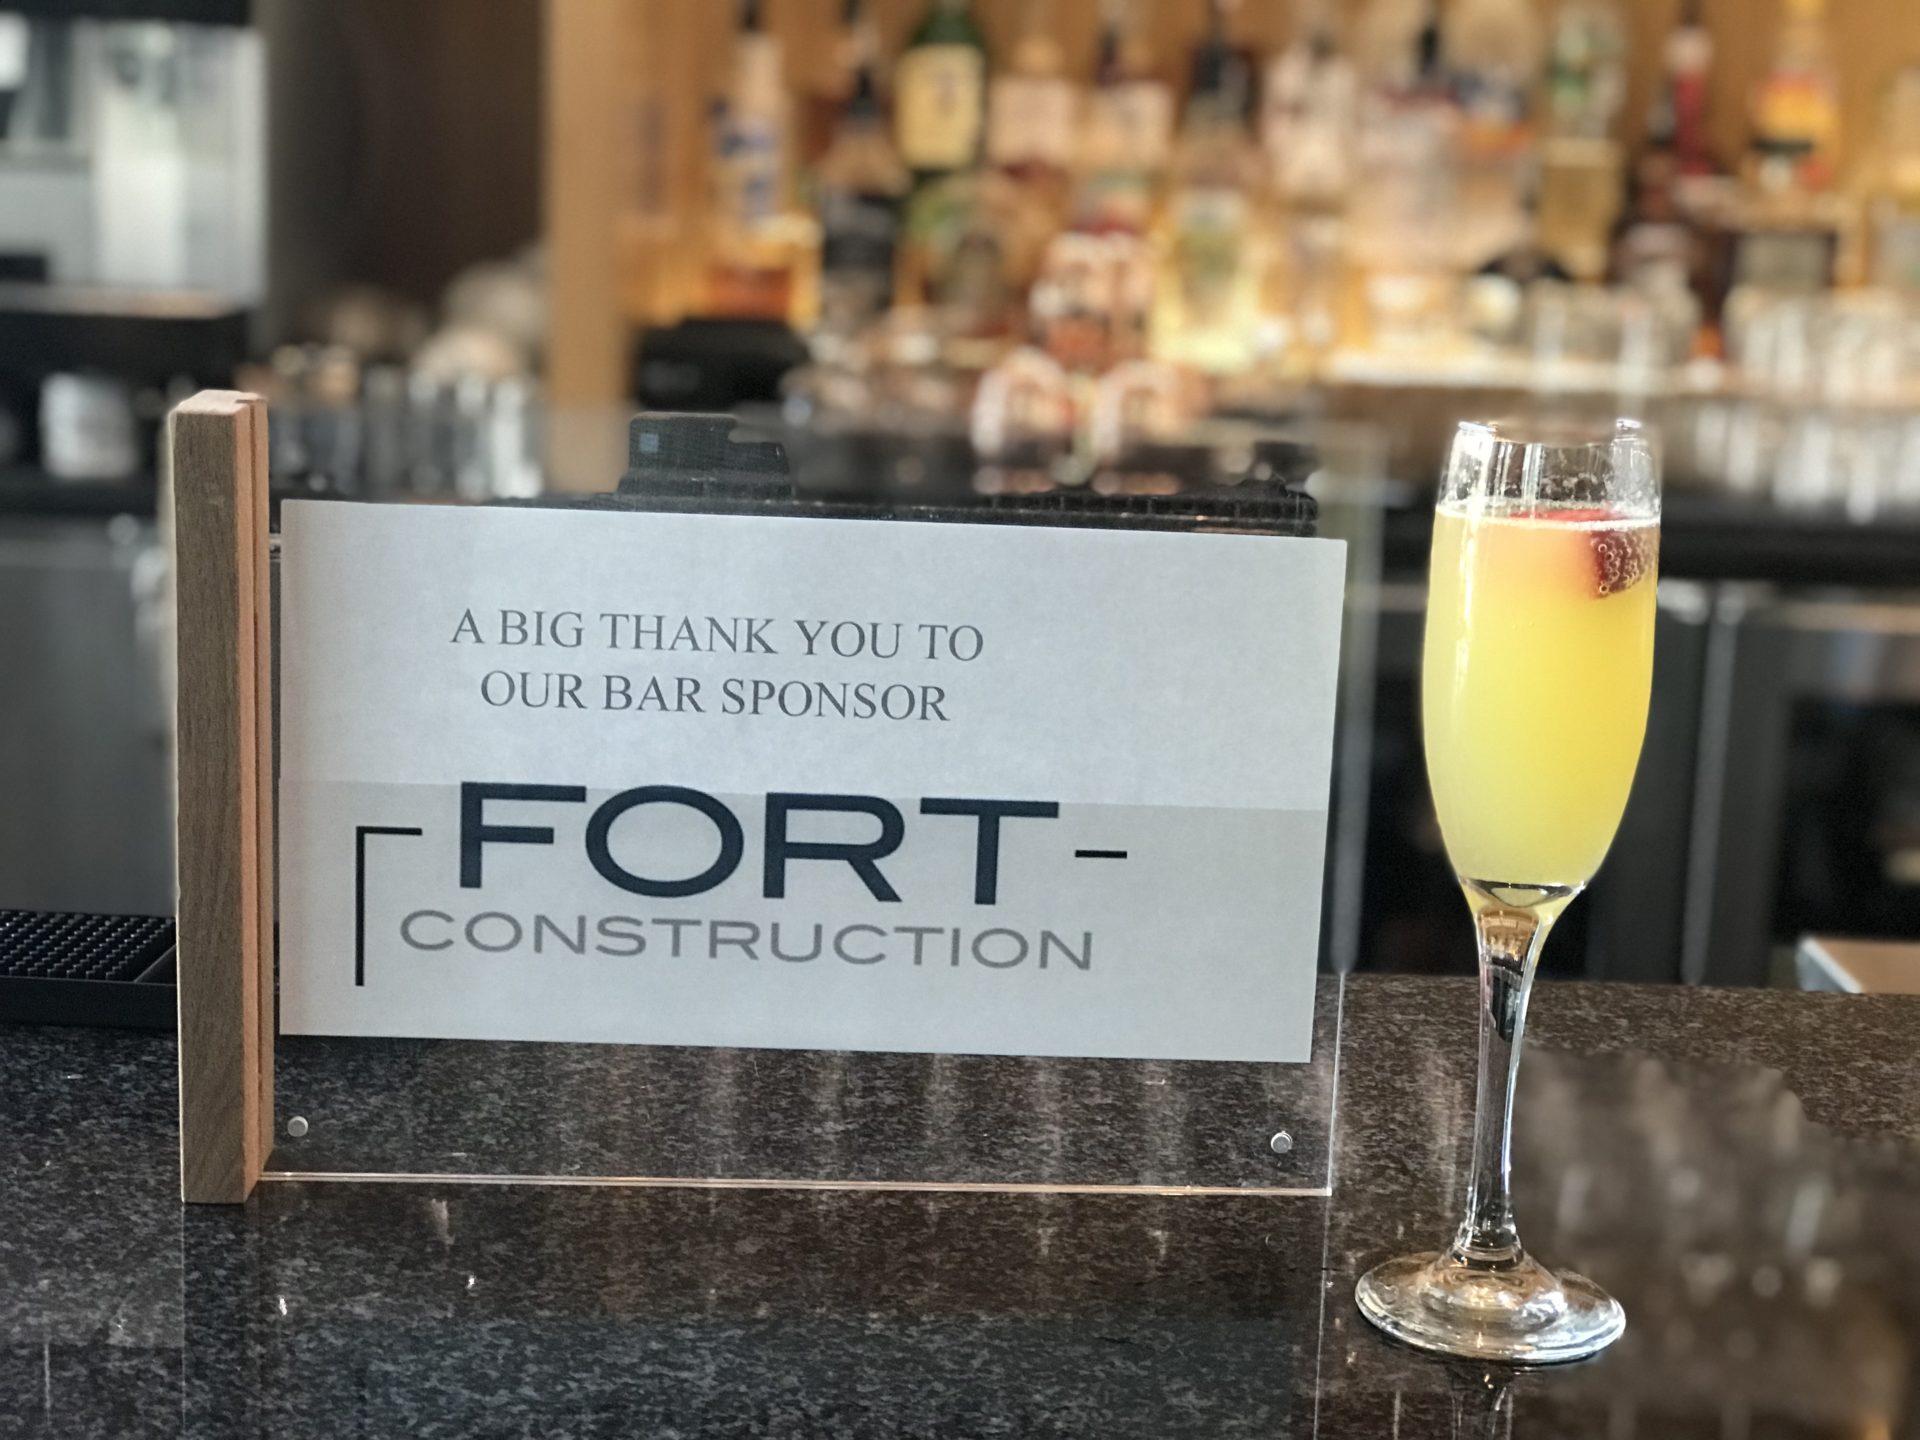 Fort sponsor card of mimosa bar at AIA Awards ceremony in Fort Worth